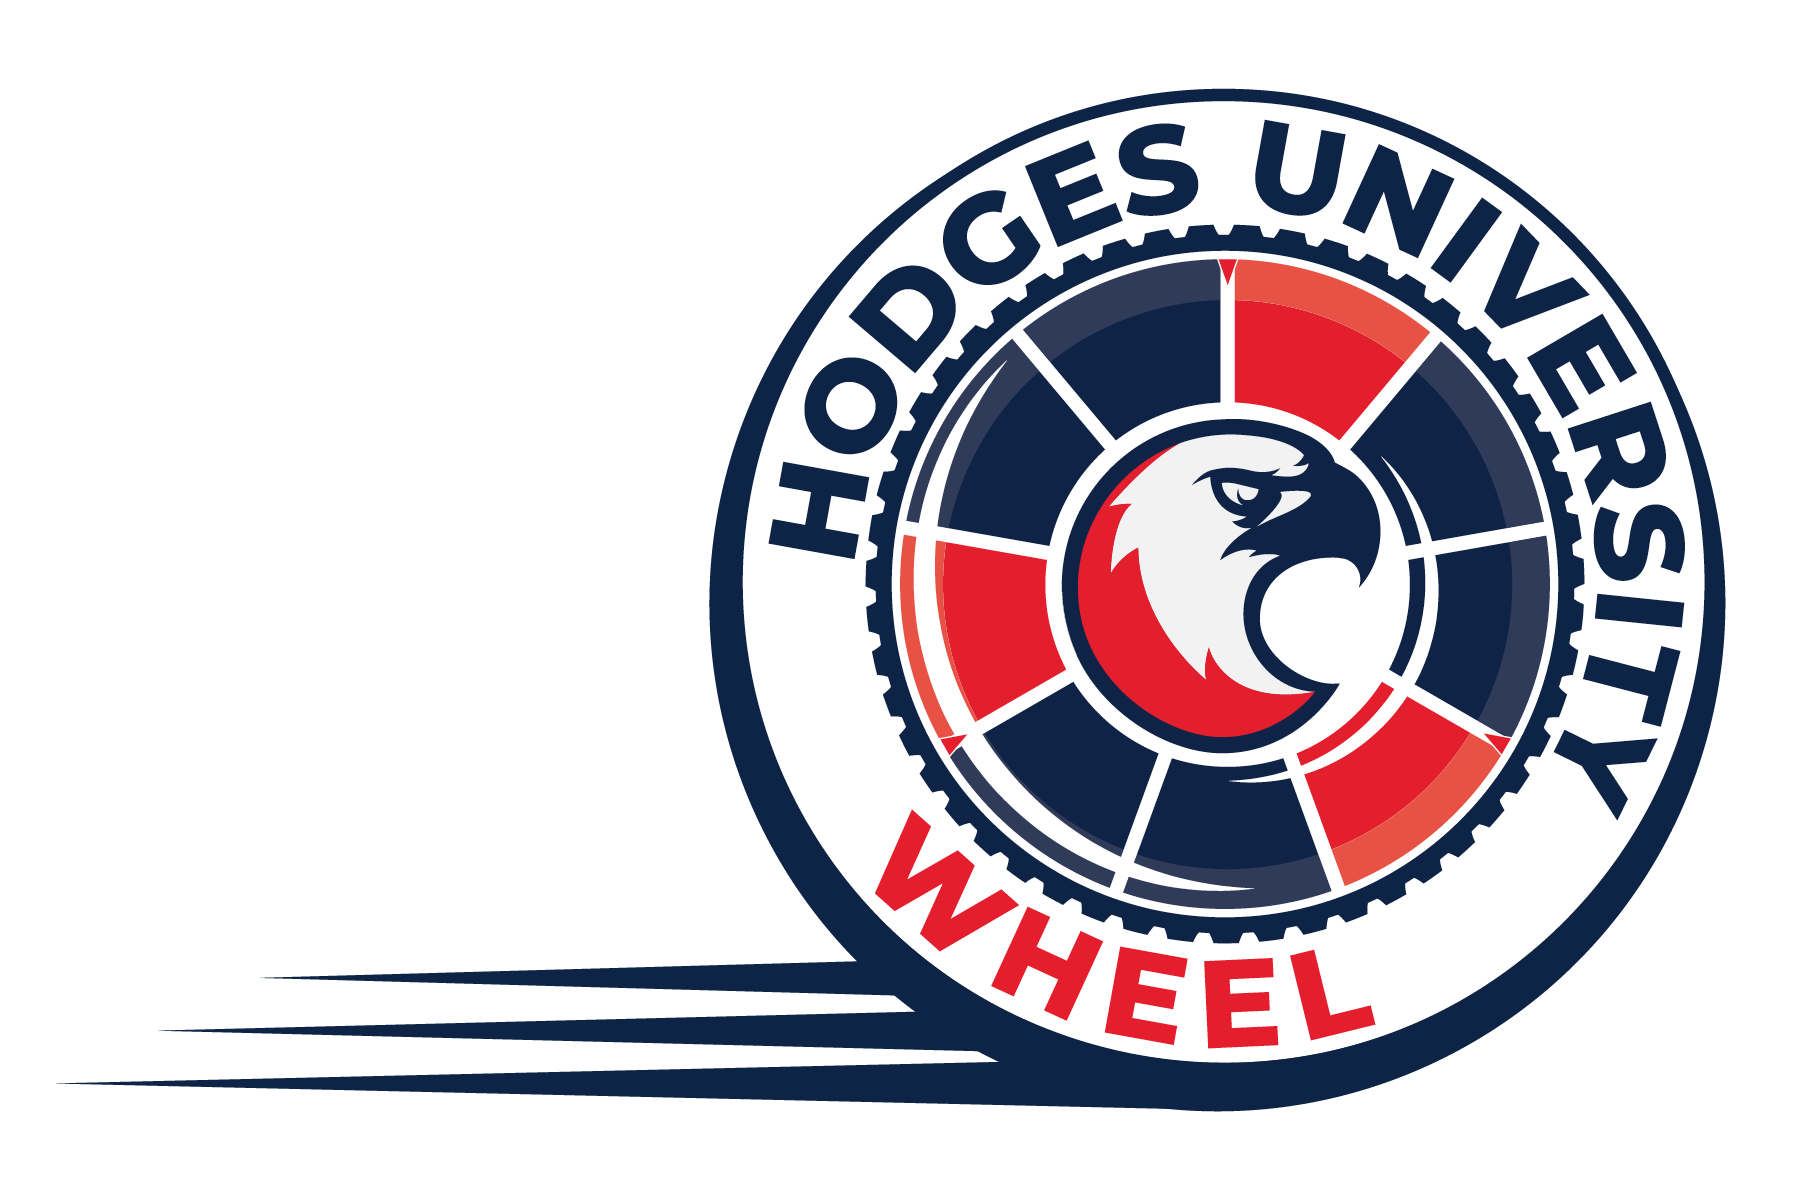 Hodges university - Learn your way with the wheel